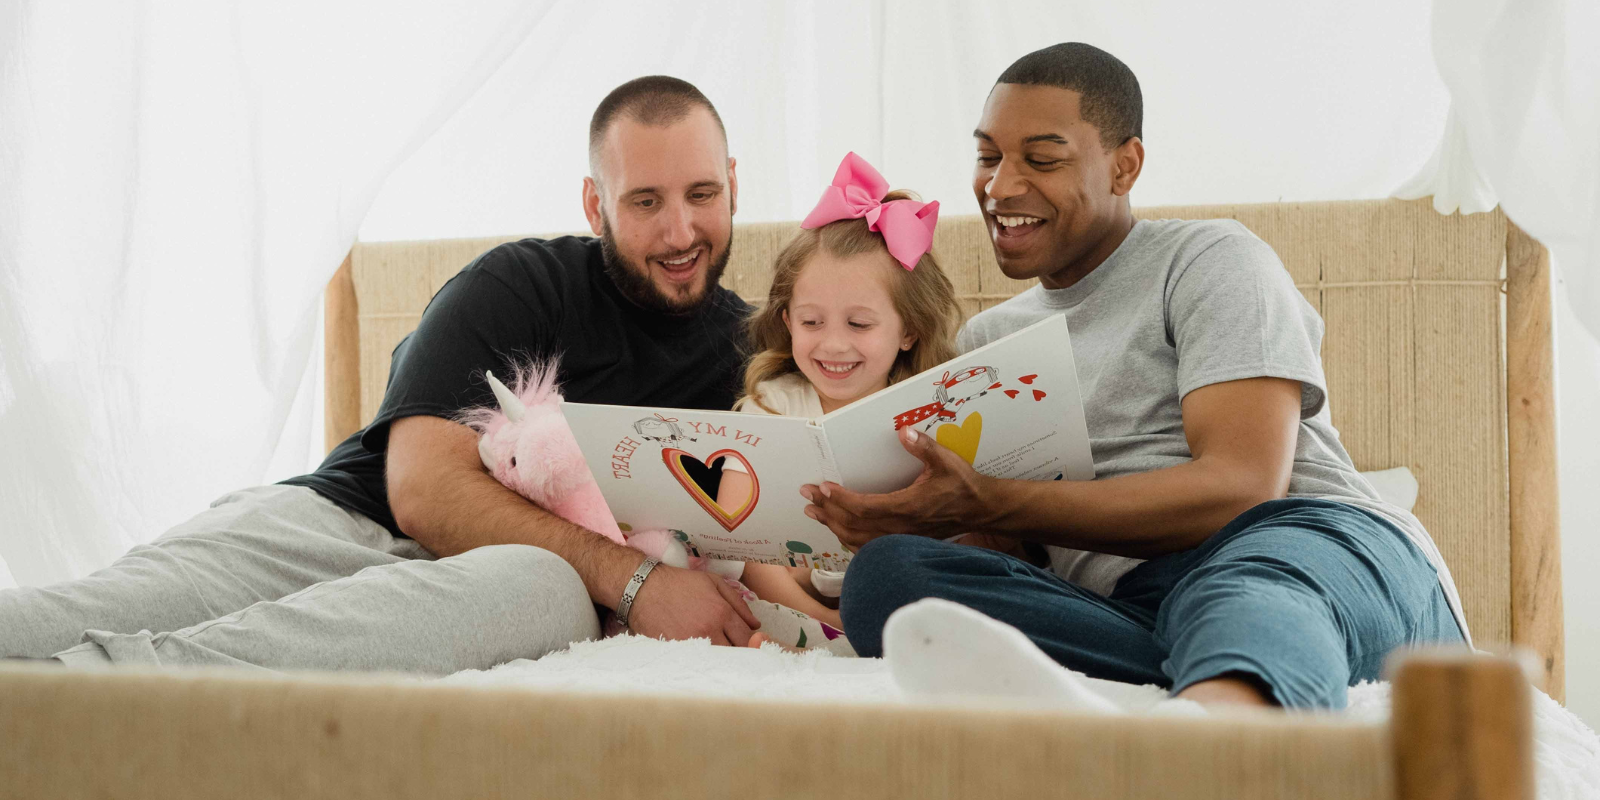 Adoptive LGTBQ couple with their daughter